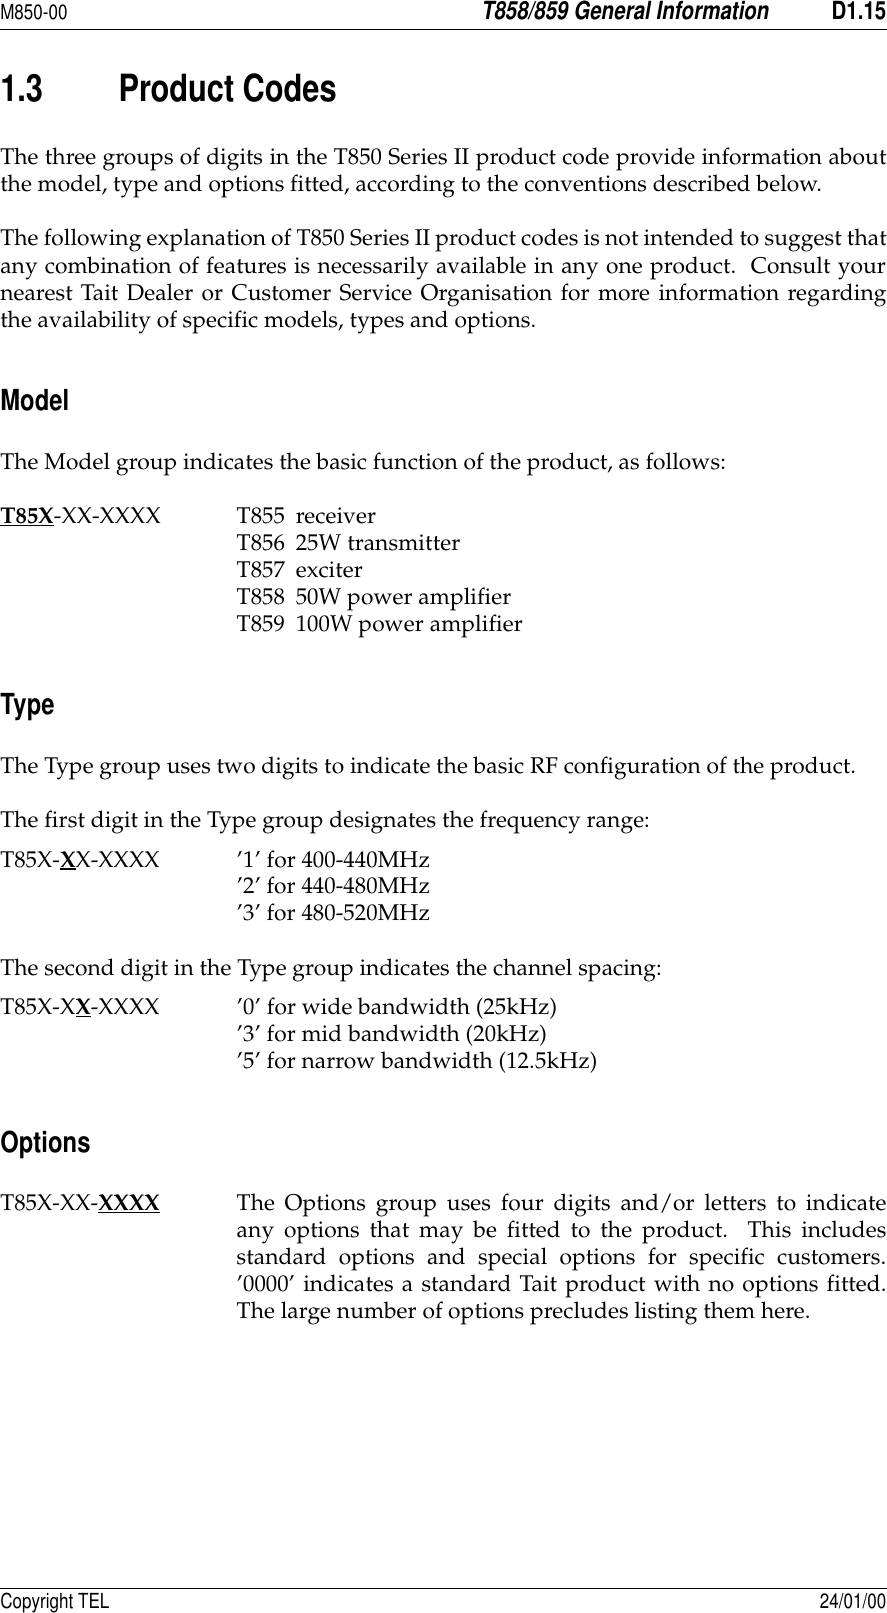 M850-00T858/859 General InformationD1.15Copyright TEL 24/01/001.3 Product CodesThe three groups of digits in the T850 Series II product code provide information aboutthe model, type and options fitted, according to the conventions described below.The following explanation of T850 Series II product codes is not intended to suggest thatany combination of features is necessarily available in any one product.  Consult yournearest Tait Dealer or Customer Service Organisation for more information regardingthe availability of specific models, types and options.ModelThe Model group indicates the basic function of the product, as follows:T85X-XX-XXXX T855 receiverT856 25W transmitterT857 exciterT858 50W power amplifierT859 100W power amplifierTypeThe Type group uses two digits to indicate the basic RF configuration of the product.The first digit in the Type group designates the frequency range:T85X-XX-XXXX ’1’ for 400-440MHz’2’ for 440-480MHz’3’ for 480-520MHzThe second digit in the Type group indicates the channel spacing:T85X-XX-XXXX ’0’ for wide bandwidth (25kHz)’3’ for mid bandwidth (20kHz)’5’ for narrow bandwidth (12.5kHz)OptionsT85X-XX-XXXX The Options group uses four digits and/or letters to indicateany options that may be fitted to the product.  This includesstandard options and special options for specific customers.’0000’ indicates a standard Tait product with no options fitted.The large number of options precludes listing them here.